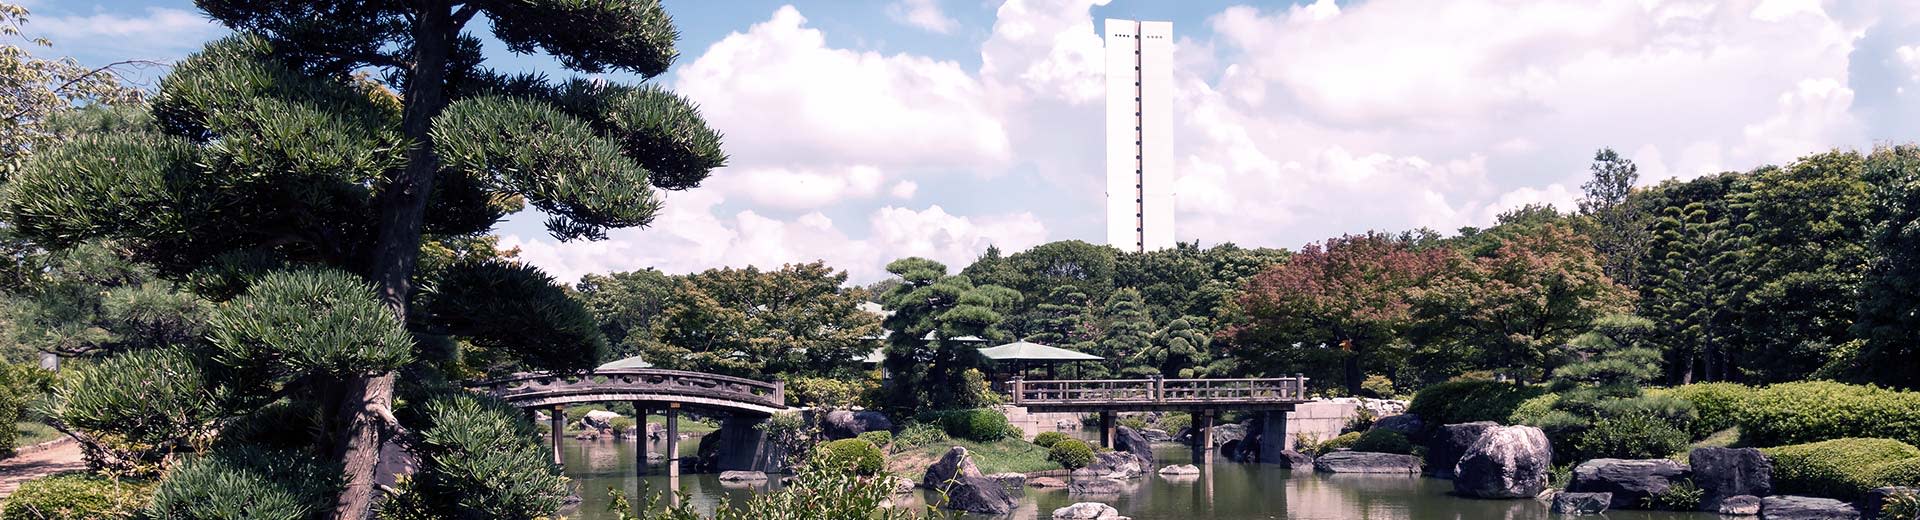 A traditional, green Japanese garden dominates the image, with a single white building looming in the background.